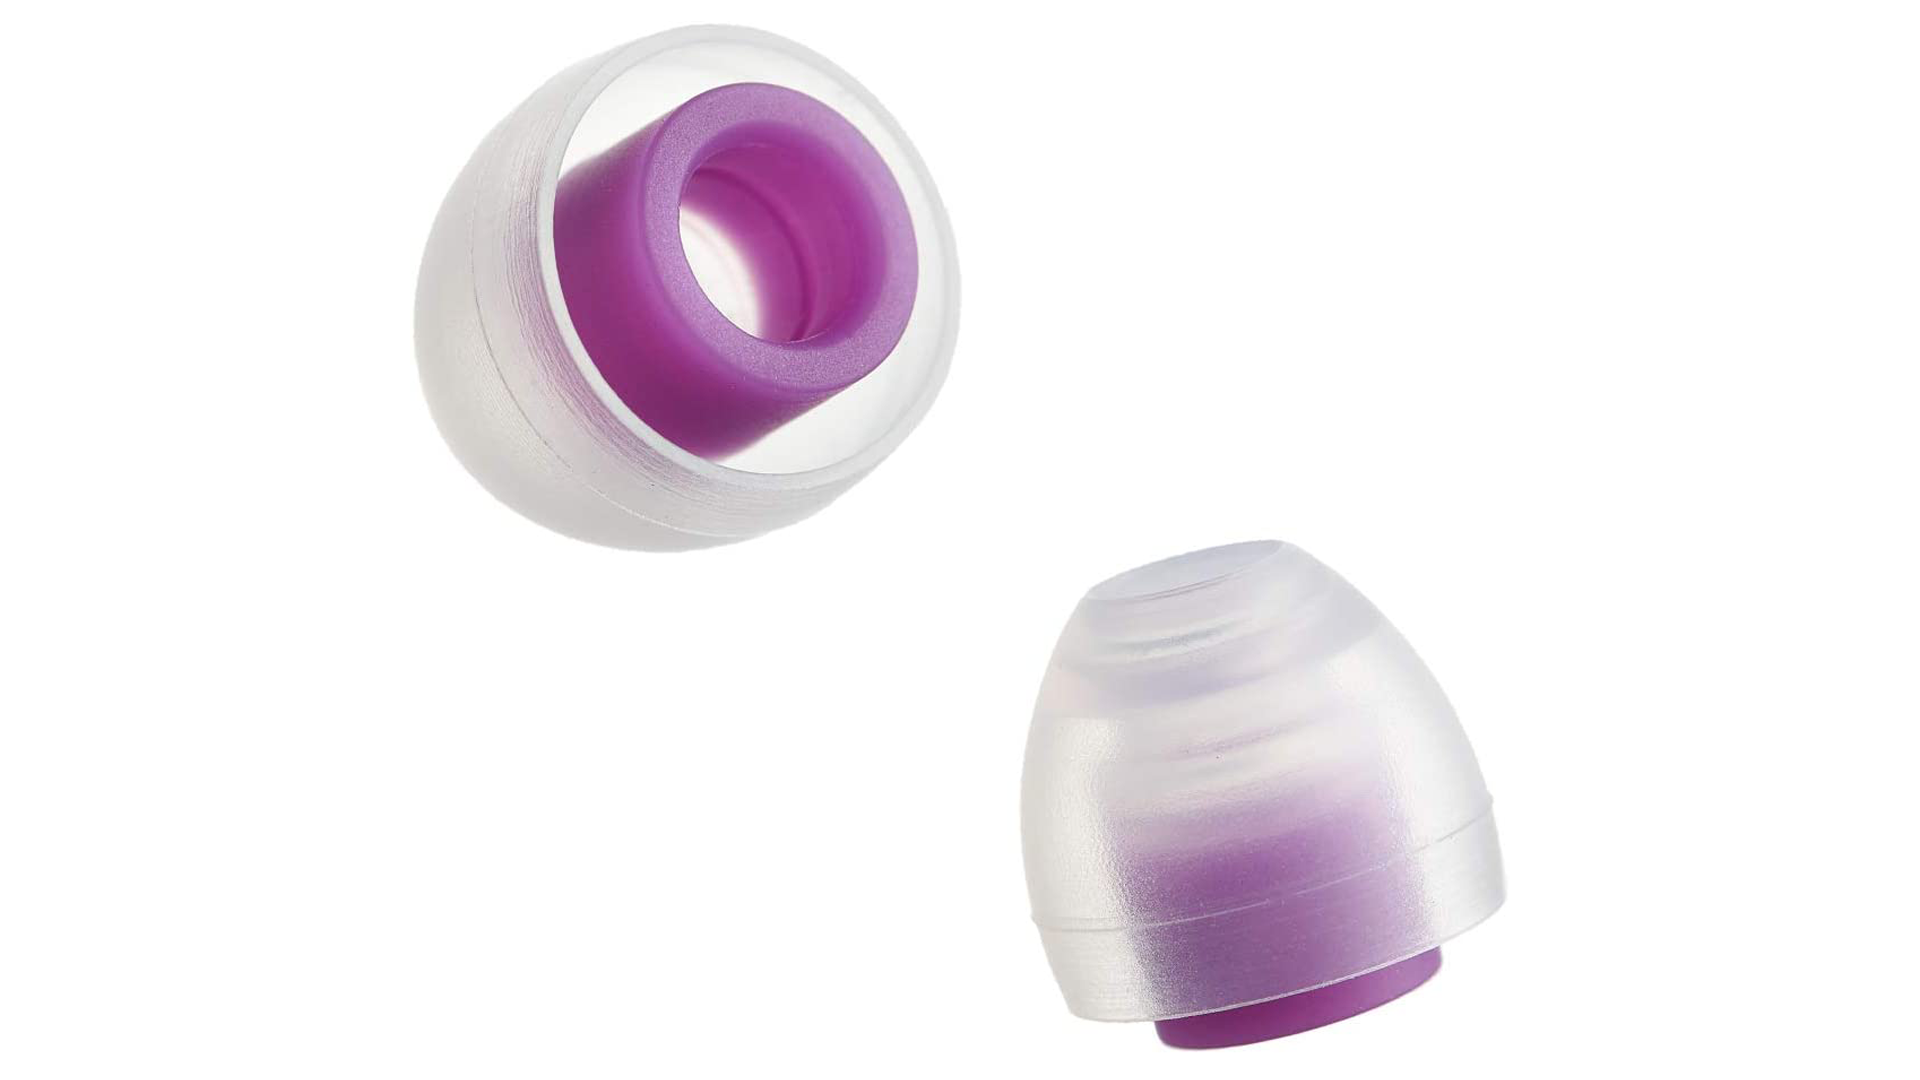 The SpinFit CP100 silicone earbud tips in purple